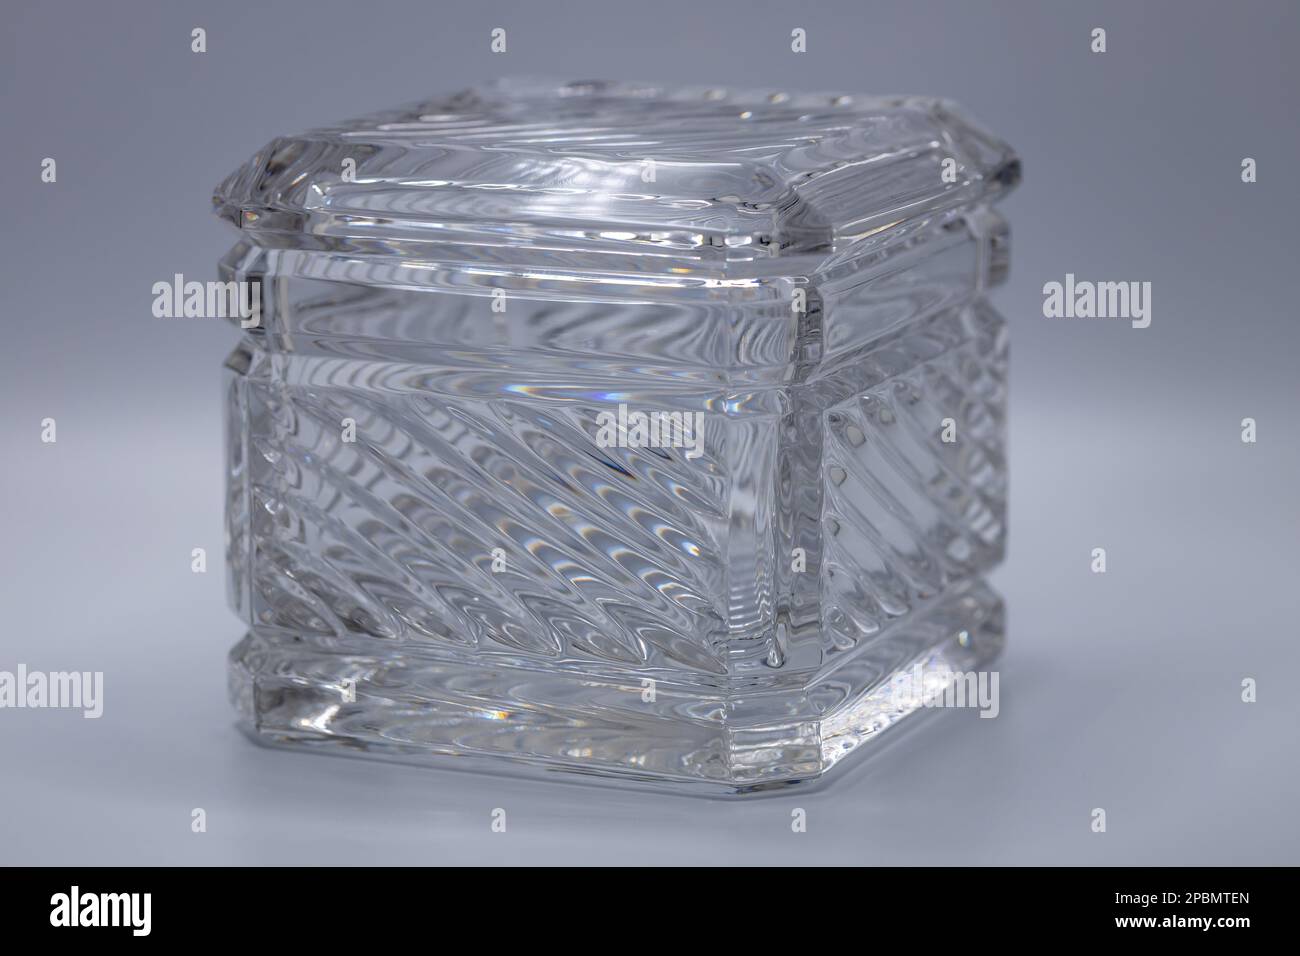 Close up view of a beautiful modern square lead crystal glass box with shimmering diagonal striped lines, reflecting light Stock Photo